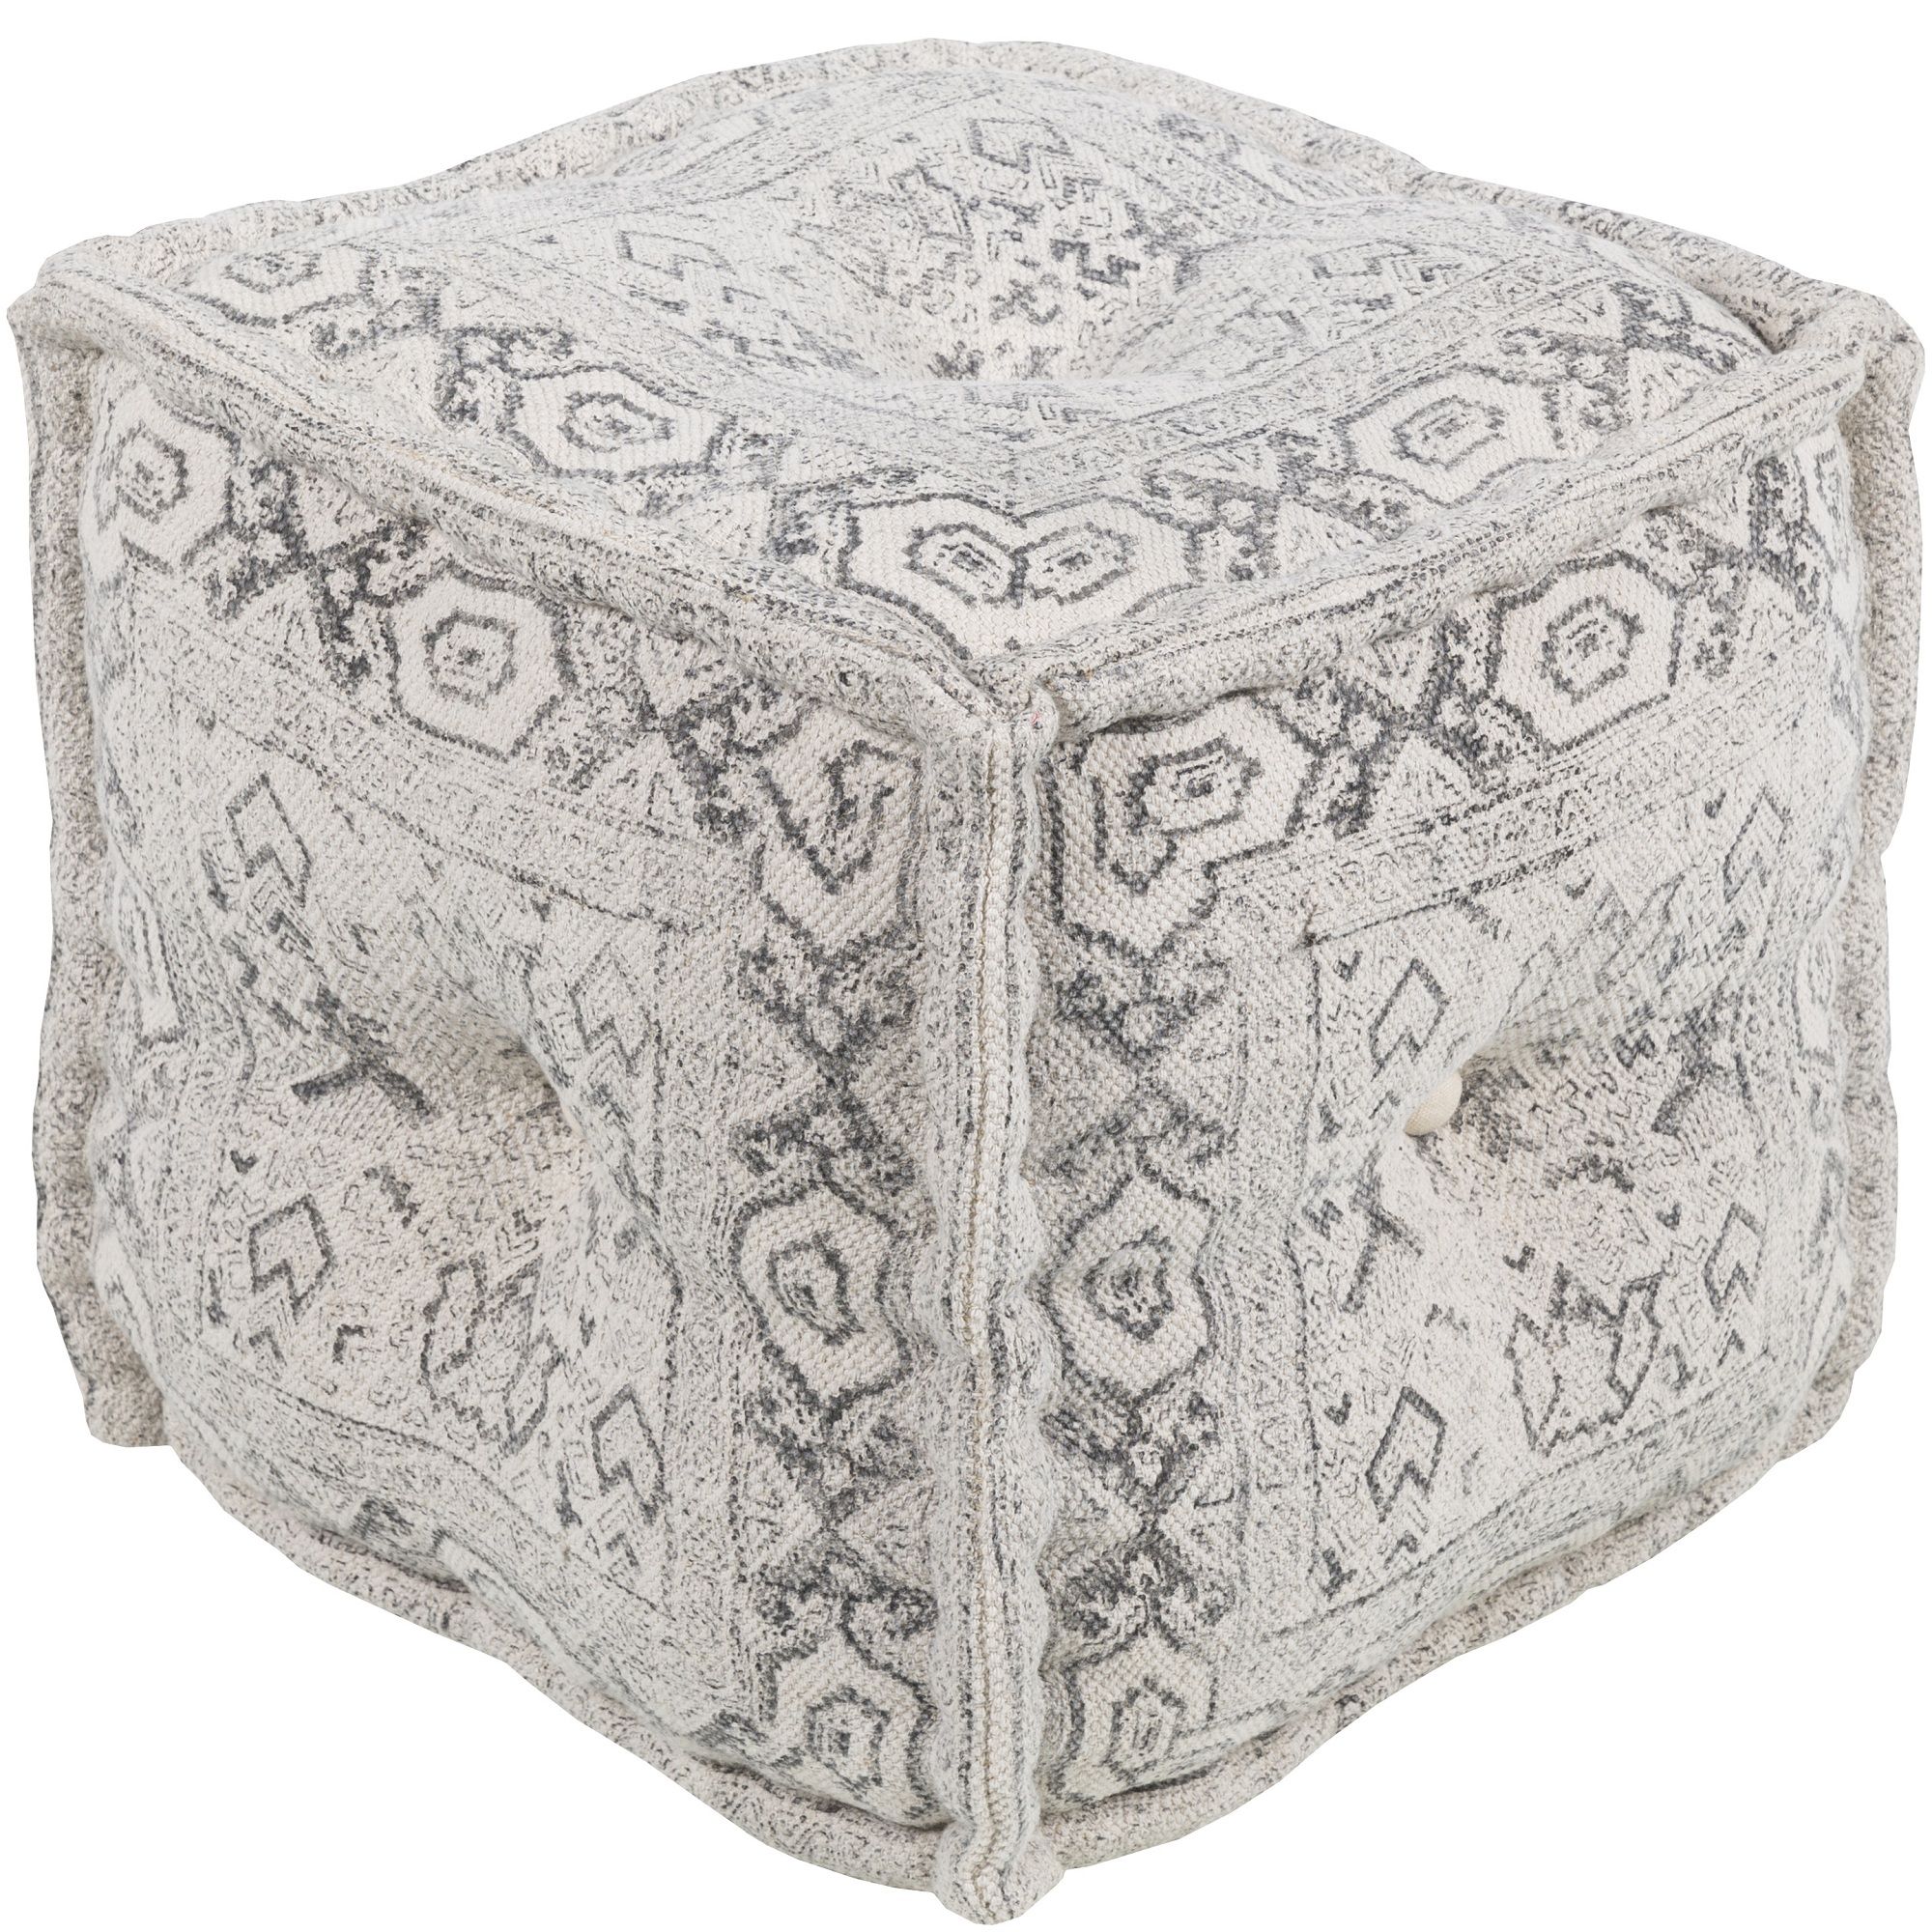 16" White And Gray Bohemian Style Design Cotton Square Pouf Ottoman Inside Charcoal And Light Gray Cotton Pouf Ottomans (View 18 of 20)